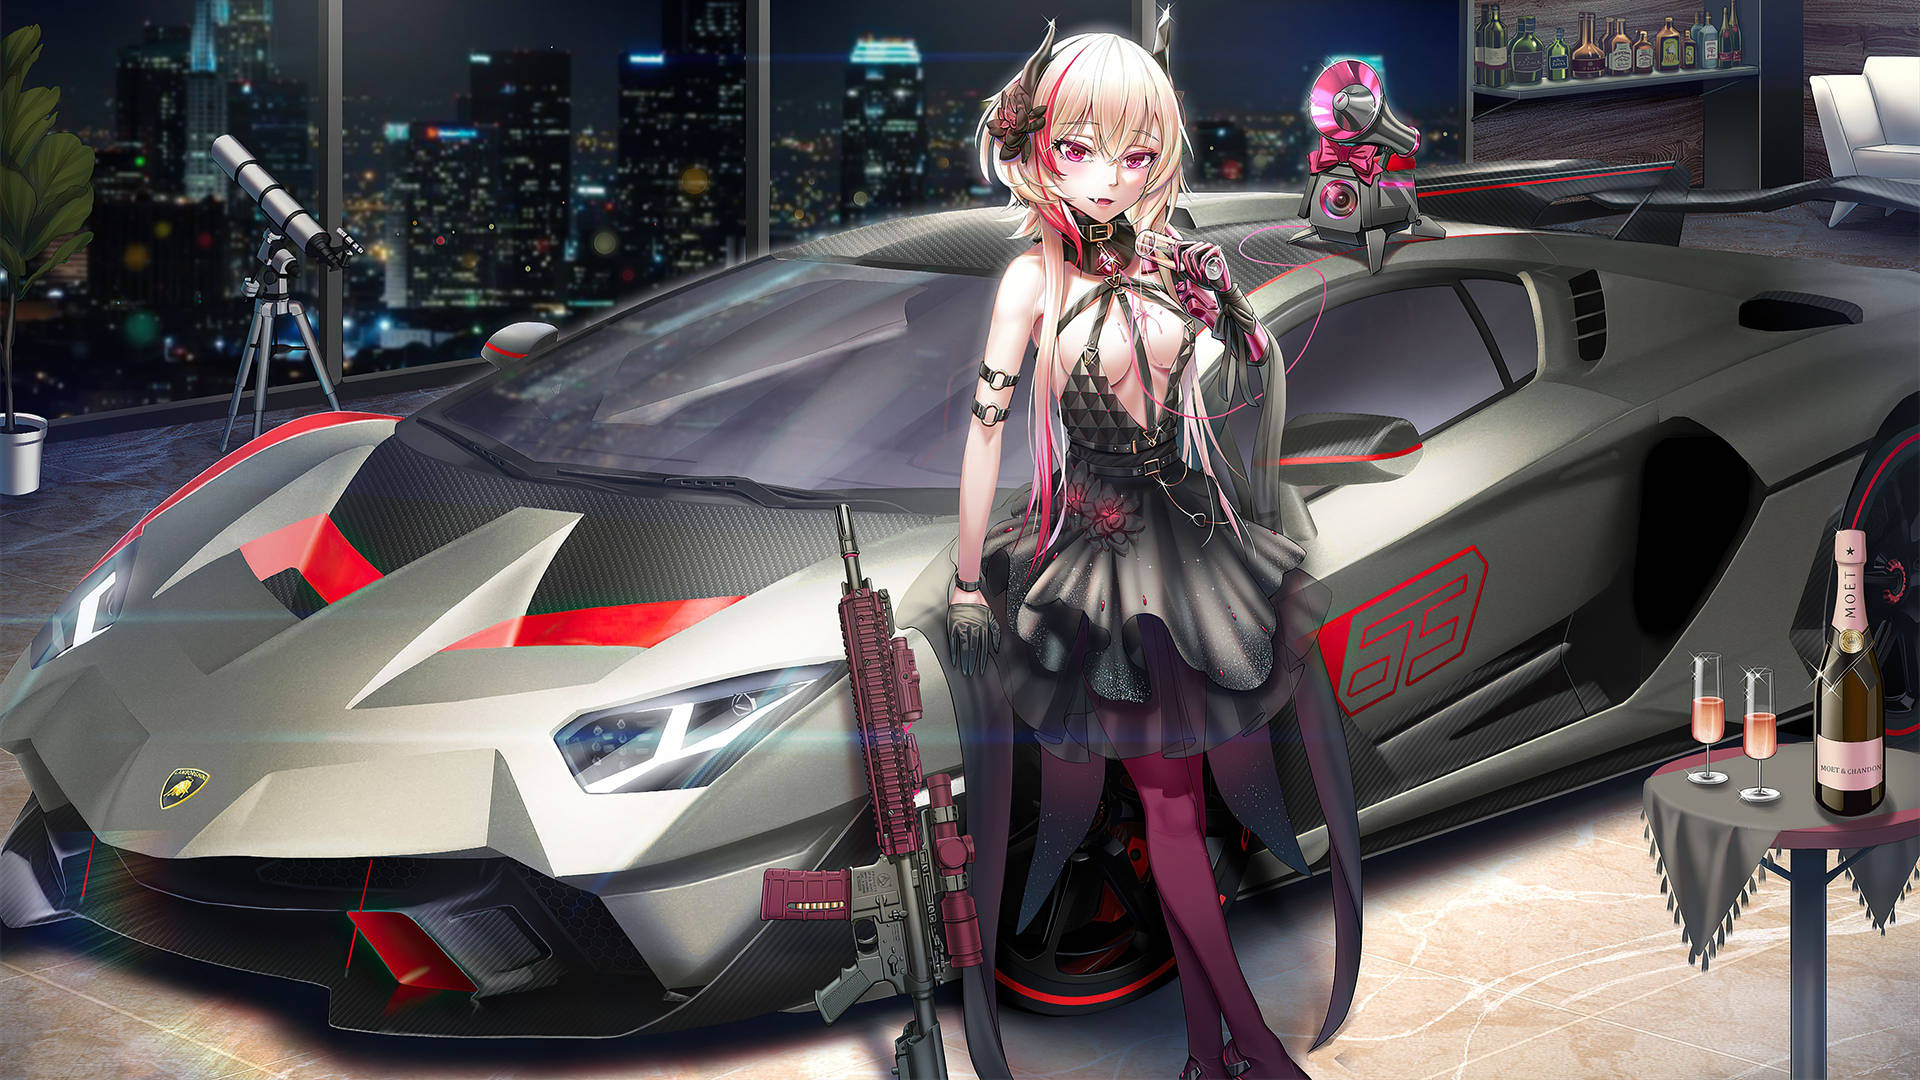 Girl With Weapons Next To A Car Anime Wallpaper